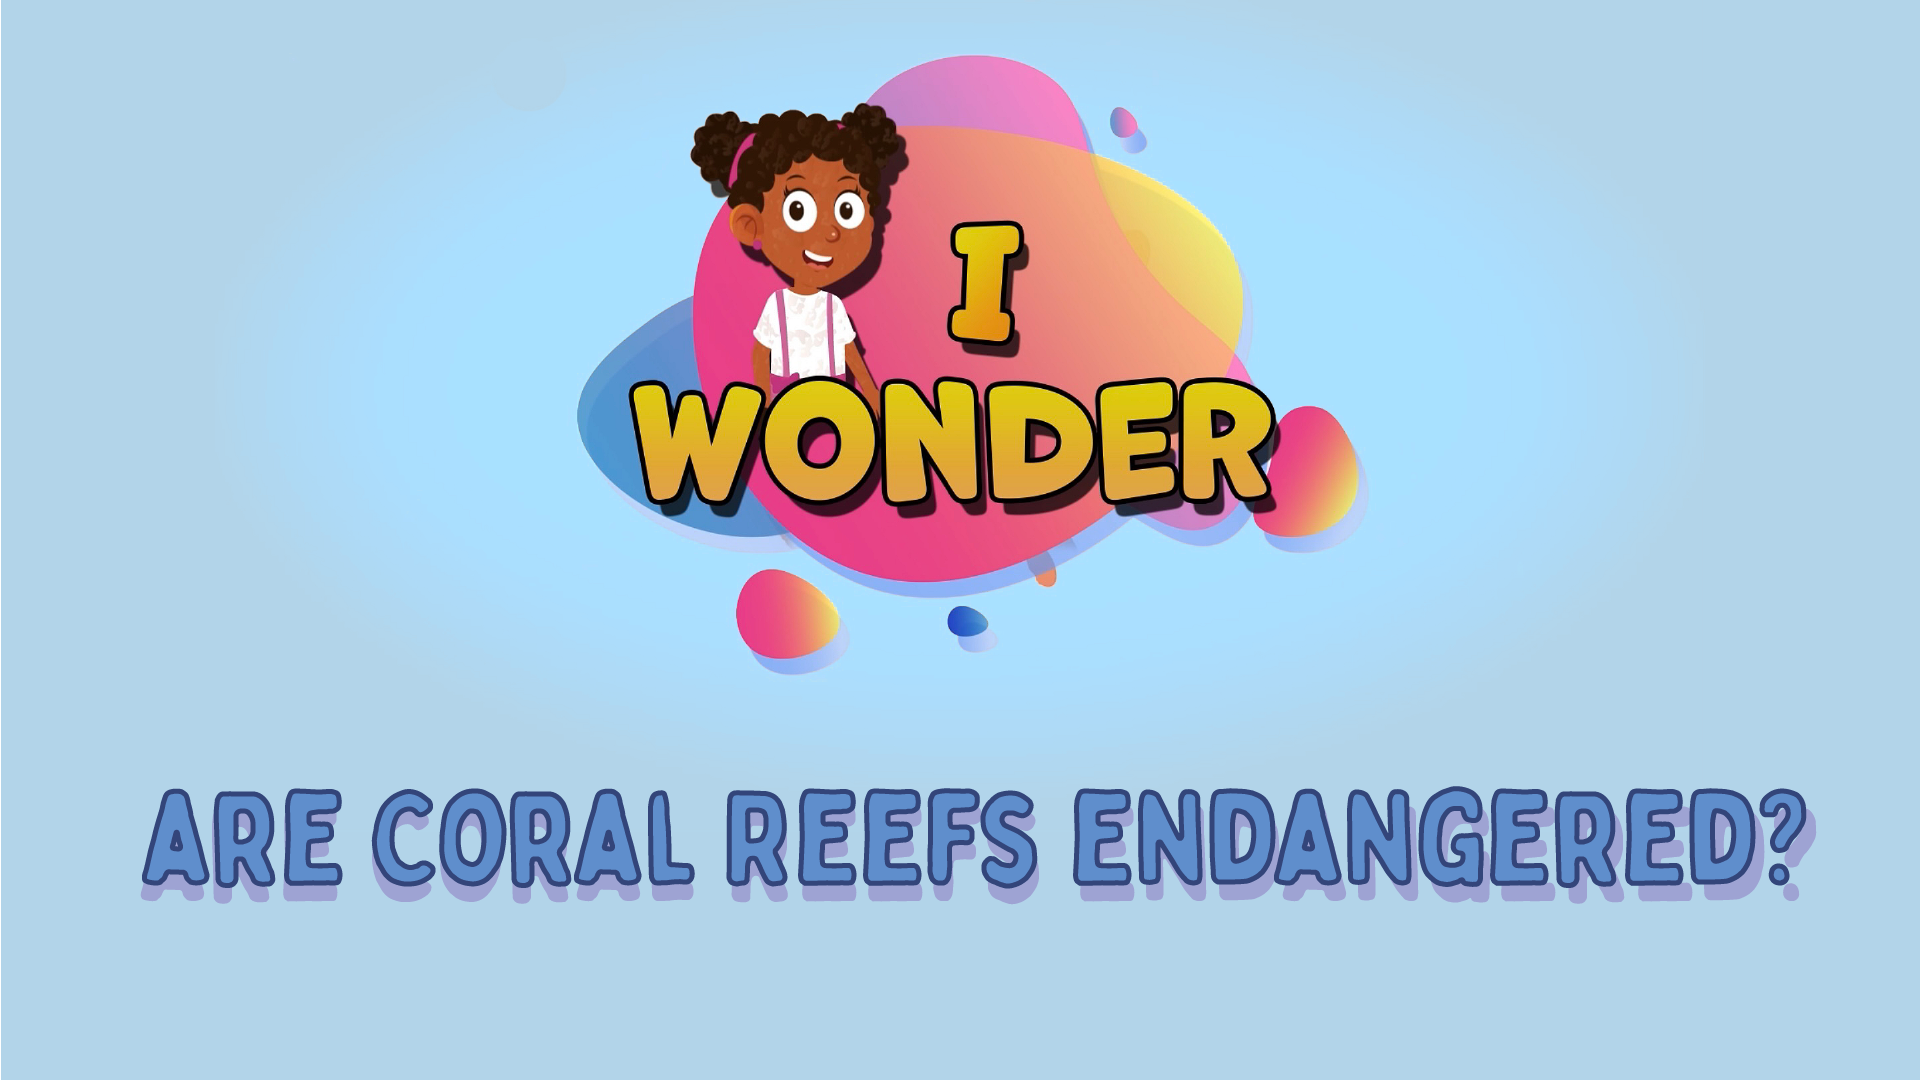 Are Coral Reefs Endangered?